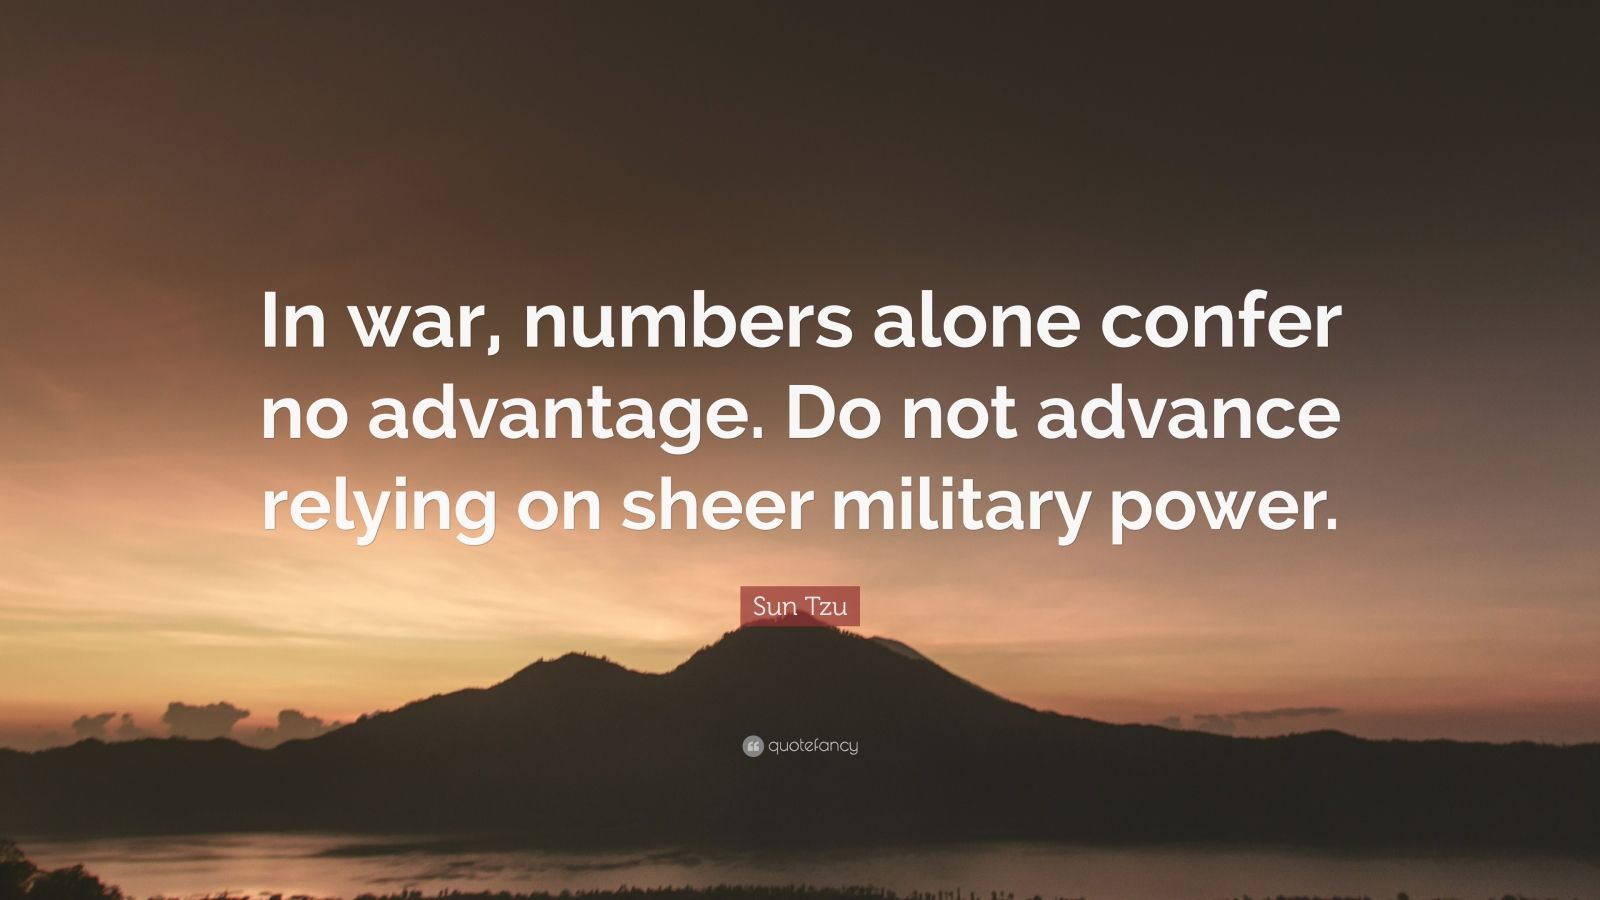 Sun Tzu Quote: “In war, numbers alone confer no advantage. Do not